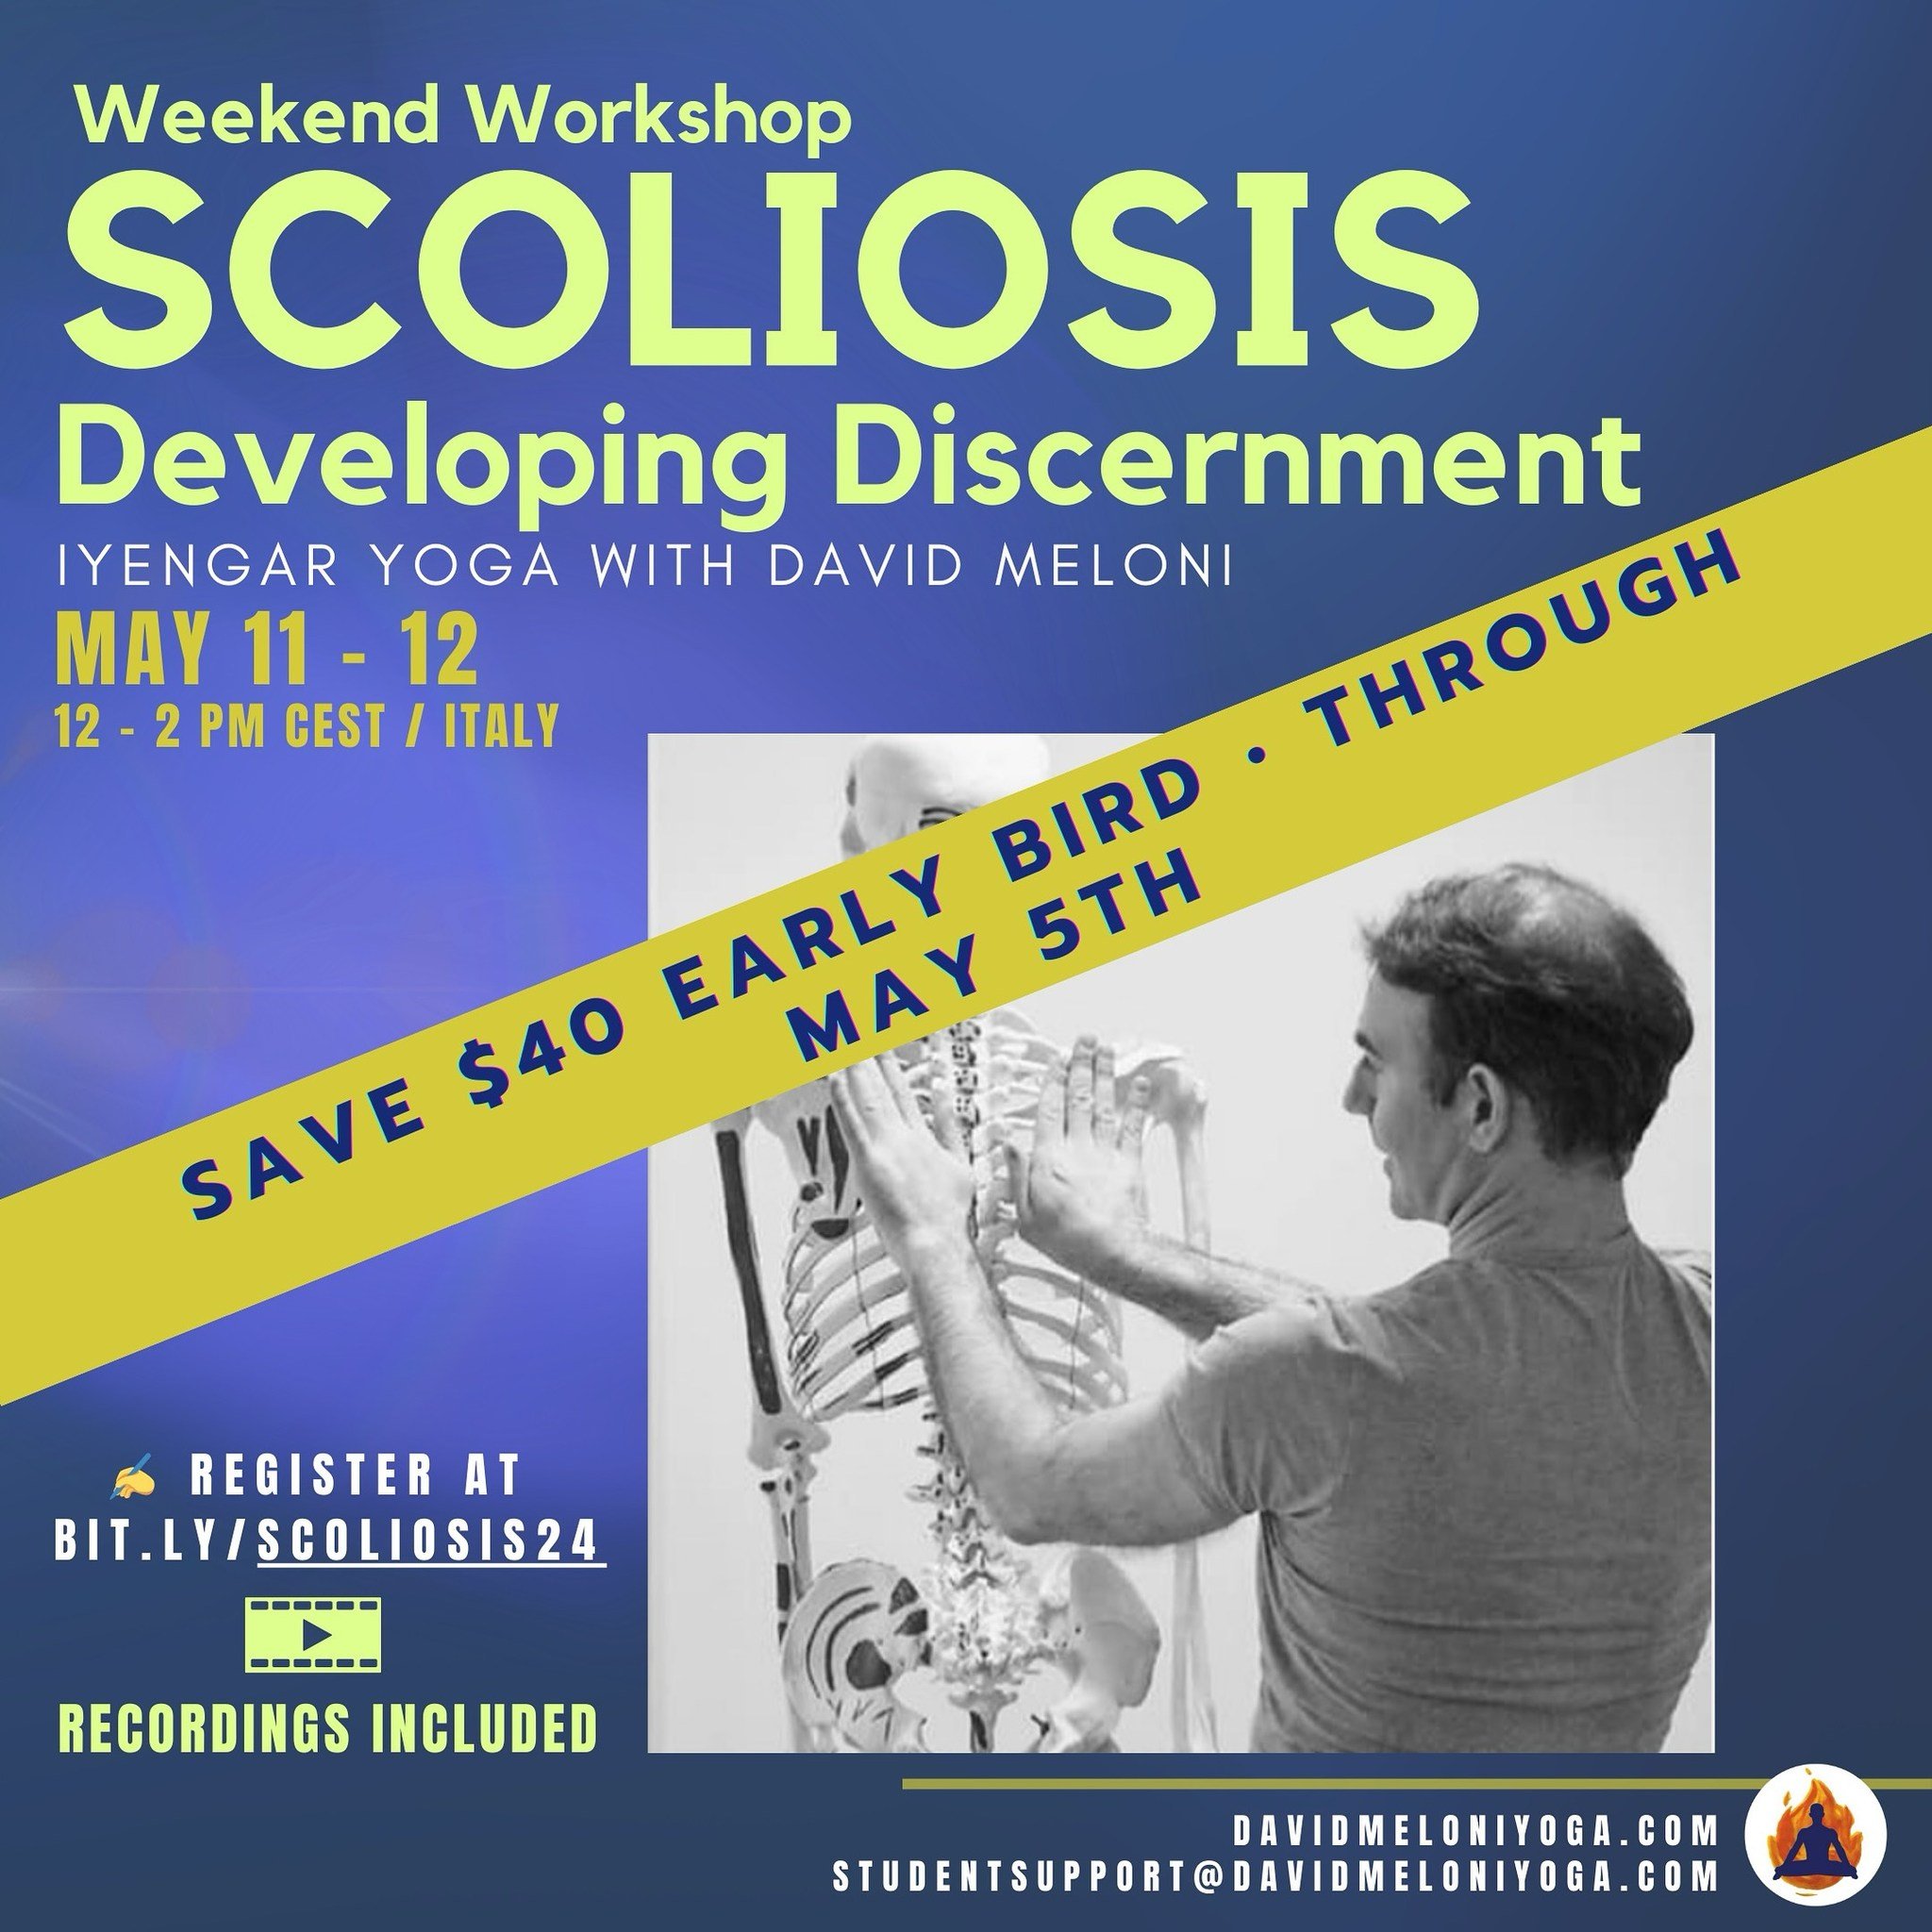 ✨&ldquo;Scoliosis: Developing Discernment&ldquo; &bull; Weekend Workshop 

✨Save $40.&nbsp;&nbsp;Early Bird through Sunday, May 5th. 

✨ 🎞️ RECORDINGS - Unlimited access

✨ WHEN: 2 Sessions.&nbsp;&nbsp;Saturday &amp; Sunday, May 11th and 12th from 1